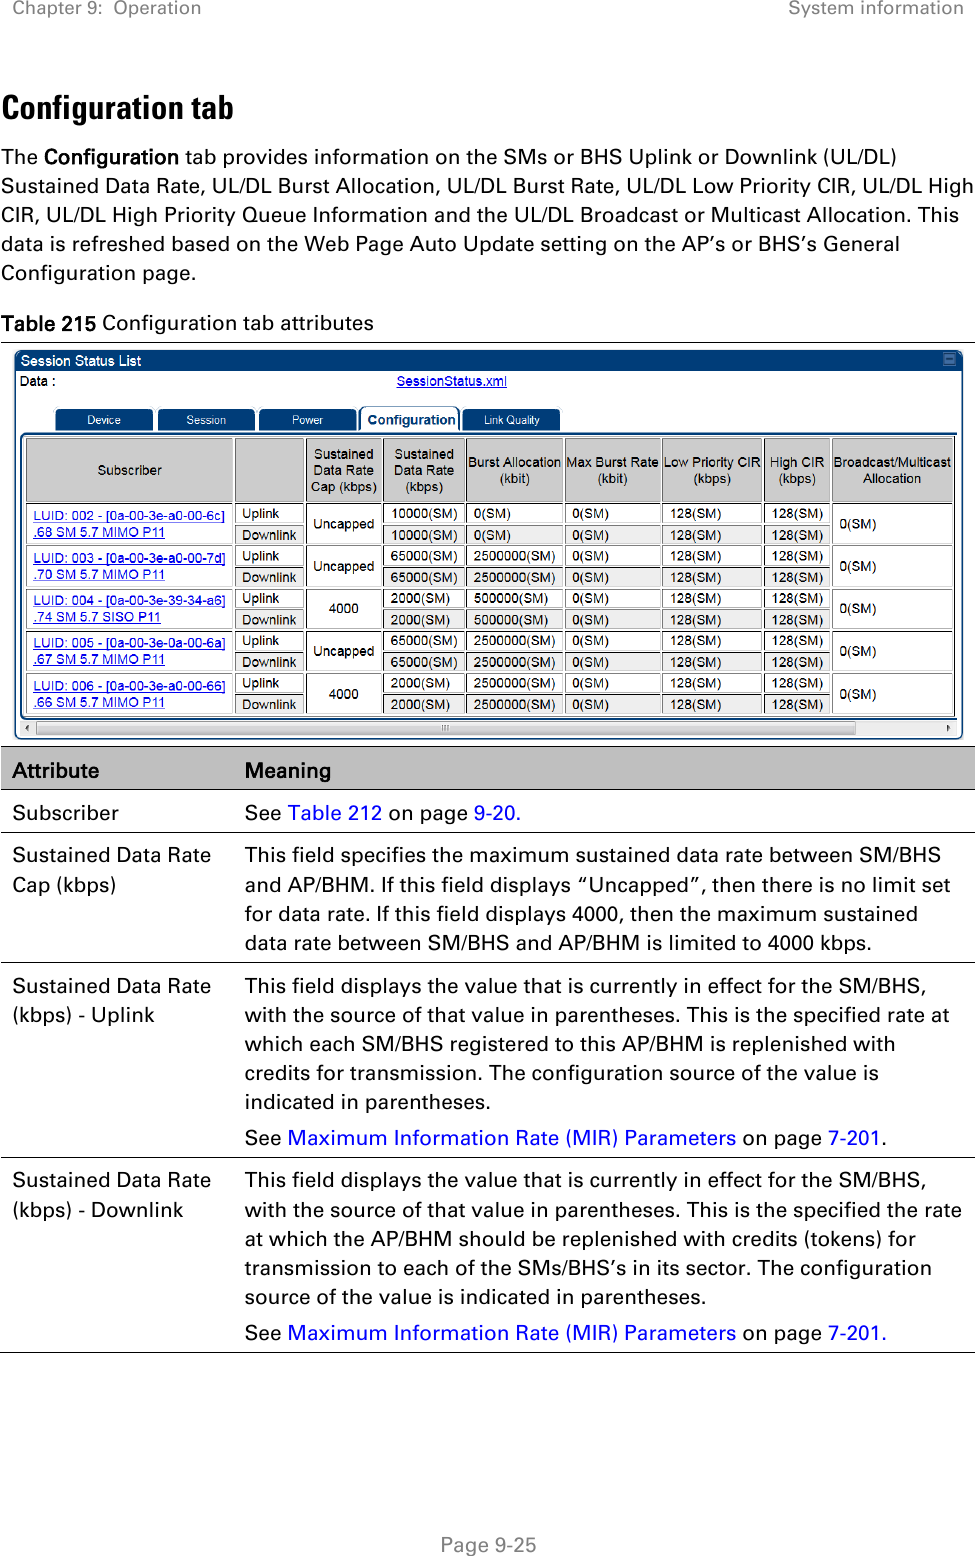 Chapter 9:  Operation System information   Page 9-25 Configuration tab The Configuration tab provides information on the SMs or BHS Uplink or Downlink (UL/DL) Sustained Data Rate, UL/DL Burst Allocation, UL/DL Burst Rate, UL/DL Low Priority CIR, UL/DL High CIR, UL/DL High Priority Queue Information and the UL/DL Broadcast or Multicast Allocation. This data is refreshed based on the Web Page Auto Update setting on the AP’s or BHS’s General Configuration page.  Table 215 Configuration tab attributes  Attribute Meaning Subscriber  See Table 212 on page 9-20. Sustained Data Rate Cap (kbps) This field specifies the maximum sustained data rate between SM/BHS and AP/BHM. If this field displays “Uncapped”, then there is no limit set for data rate. If this field displays 4000, then the maximum sustained data rate between SM/BHS and AP/BHM is limited to 4000 kbps. Sustained Data Rate (kbps) - Uplink This field displays the value that is currently in effect for the SM/BHS, with the source of that value in parentheses. This is the specified rate at which each SM/BHS registered to this AP/BHM is replenished with credits for transmission. The configuration source of the value is indicated in parentheses.  See Maximum Information Rate (MIR) Parameters on page 7-201. Sustained Data Rate (kbps) - Downlink This field displays the value that is currently in effect for the SM/BHS, with the source of that value in parentheses. This is the specified the rate at which the AP/BHM should be replenished with credits (tokens) for transmission to each of the SMs/BHS’s in its sector. The configuration source of the value is indicated in parentheses.  See Maximum Information Rate (MIR) Parameters on page 7-201. 